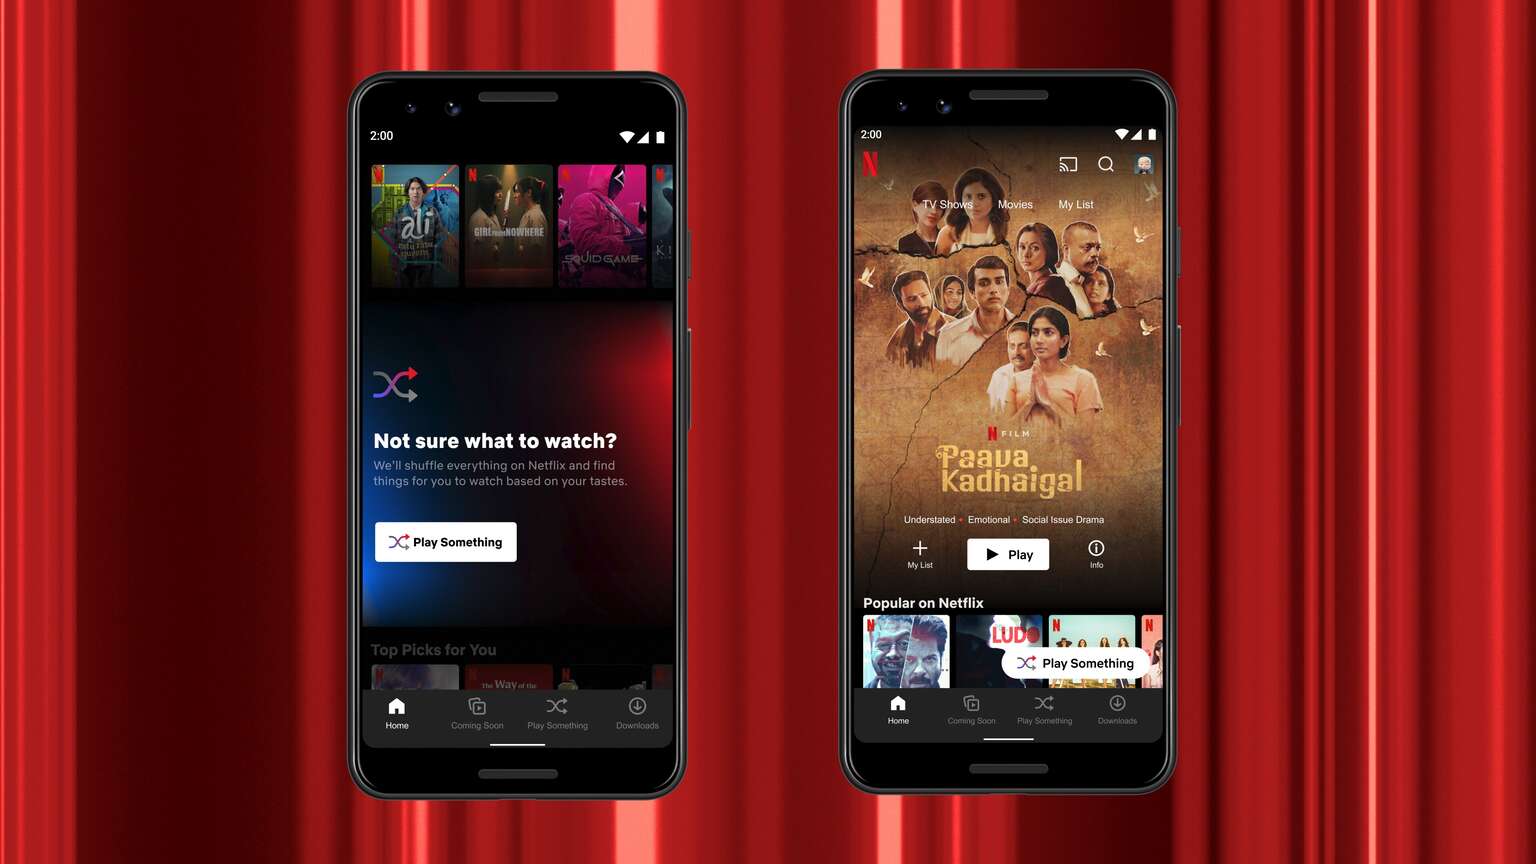 Netflix’s ‘Play Something’ Feature Rolls out on Android